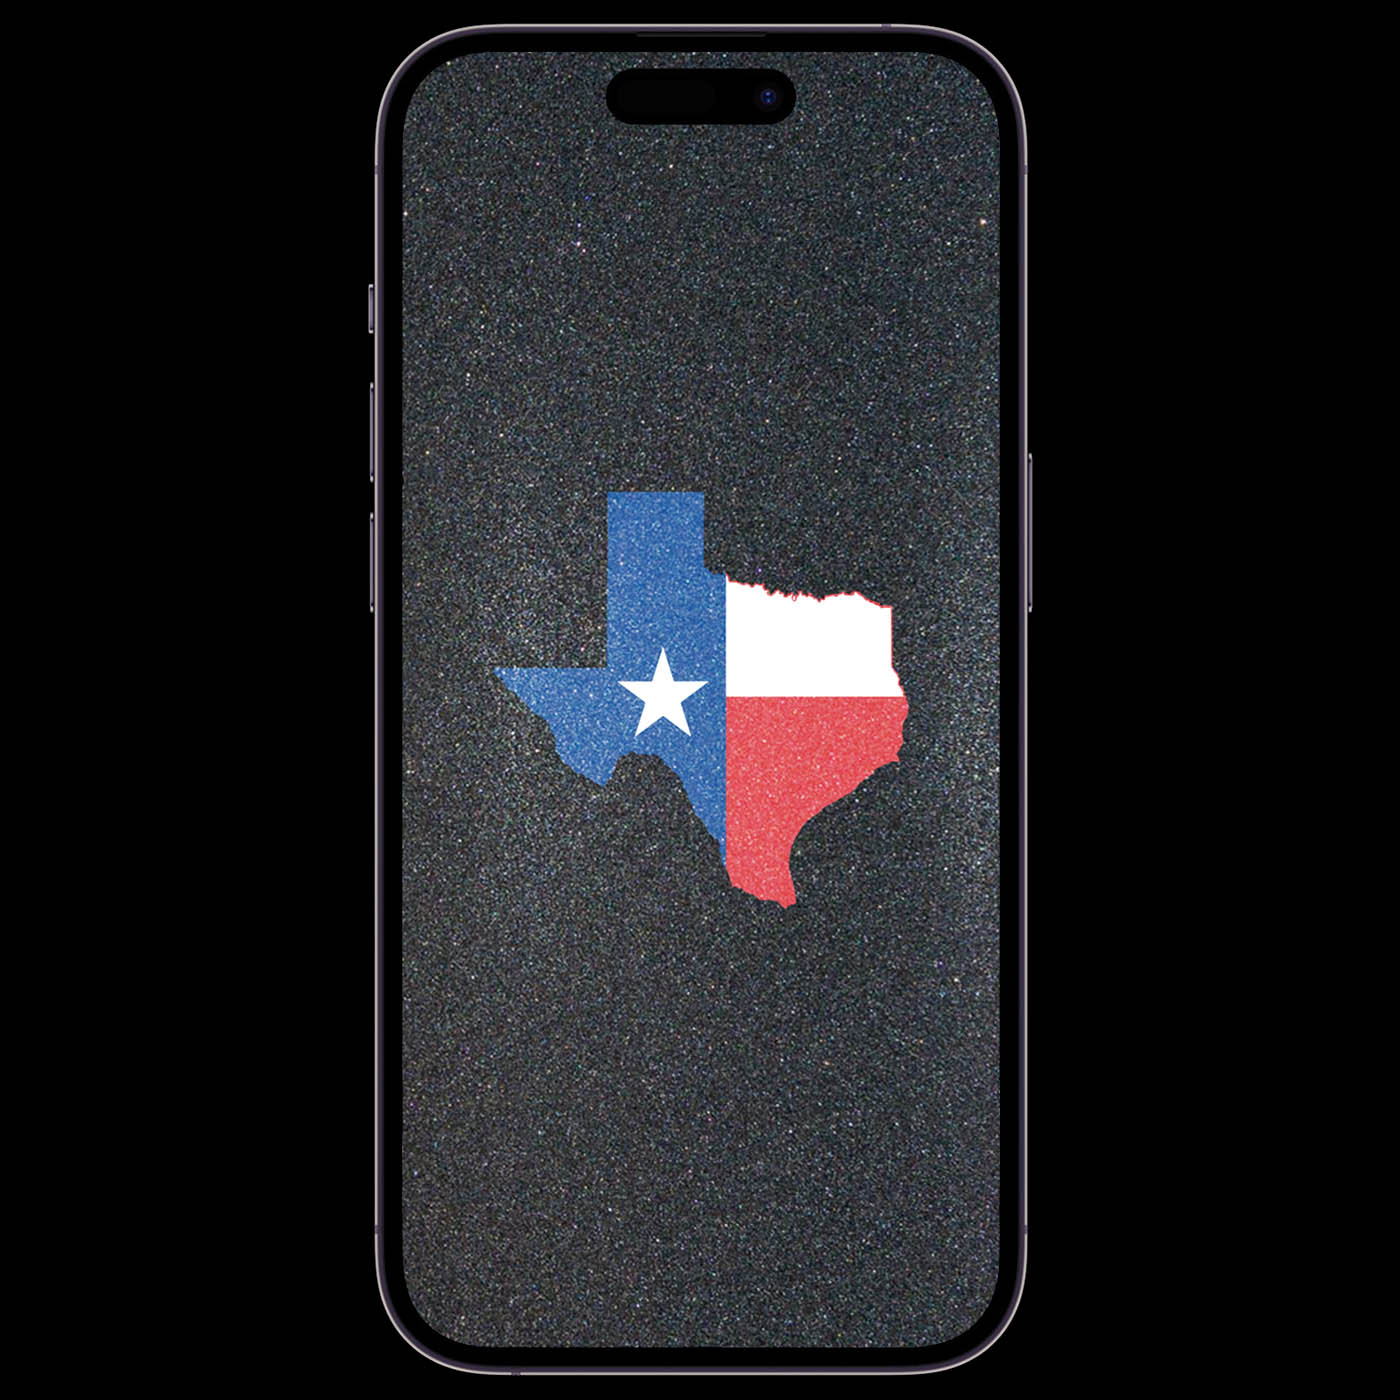 FREE Texas Griptape wallpaper for your phone.